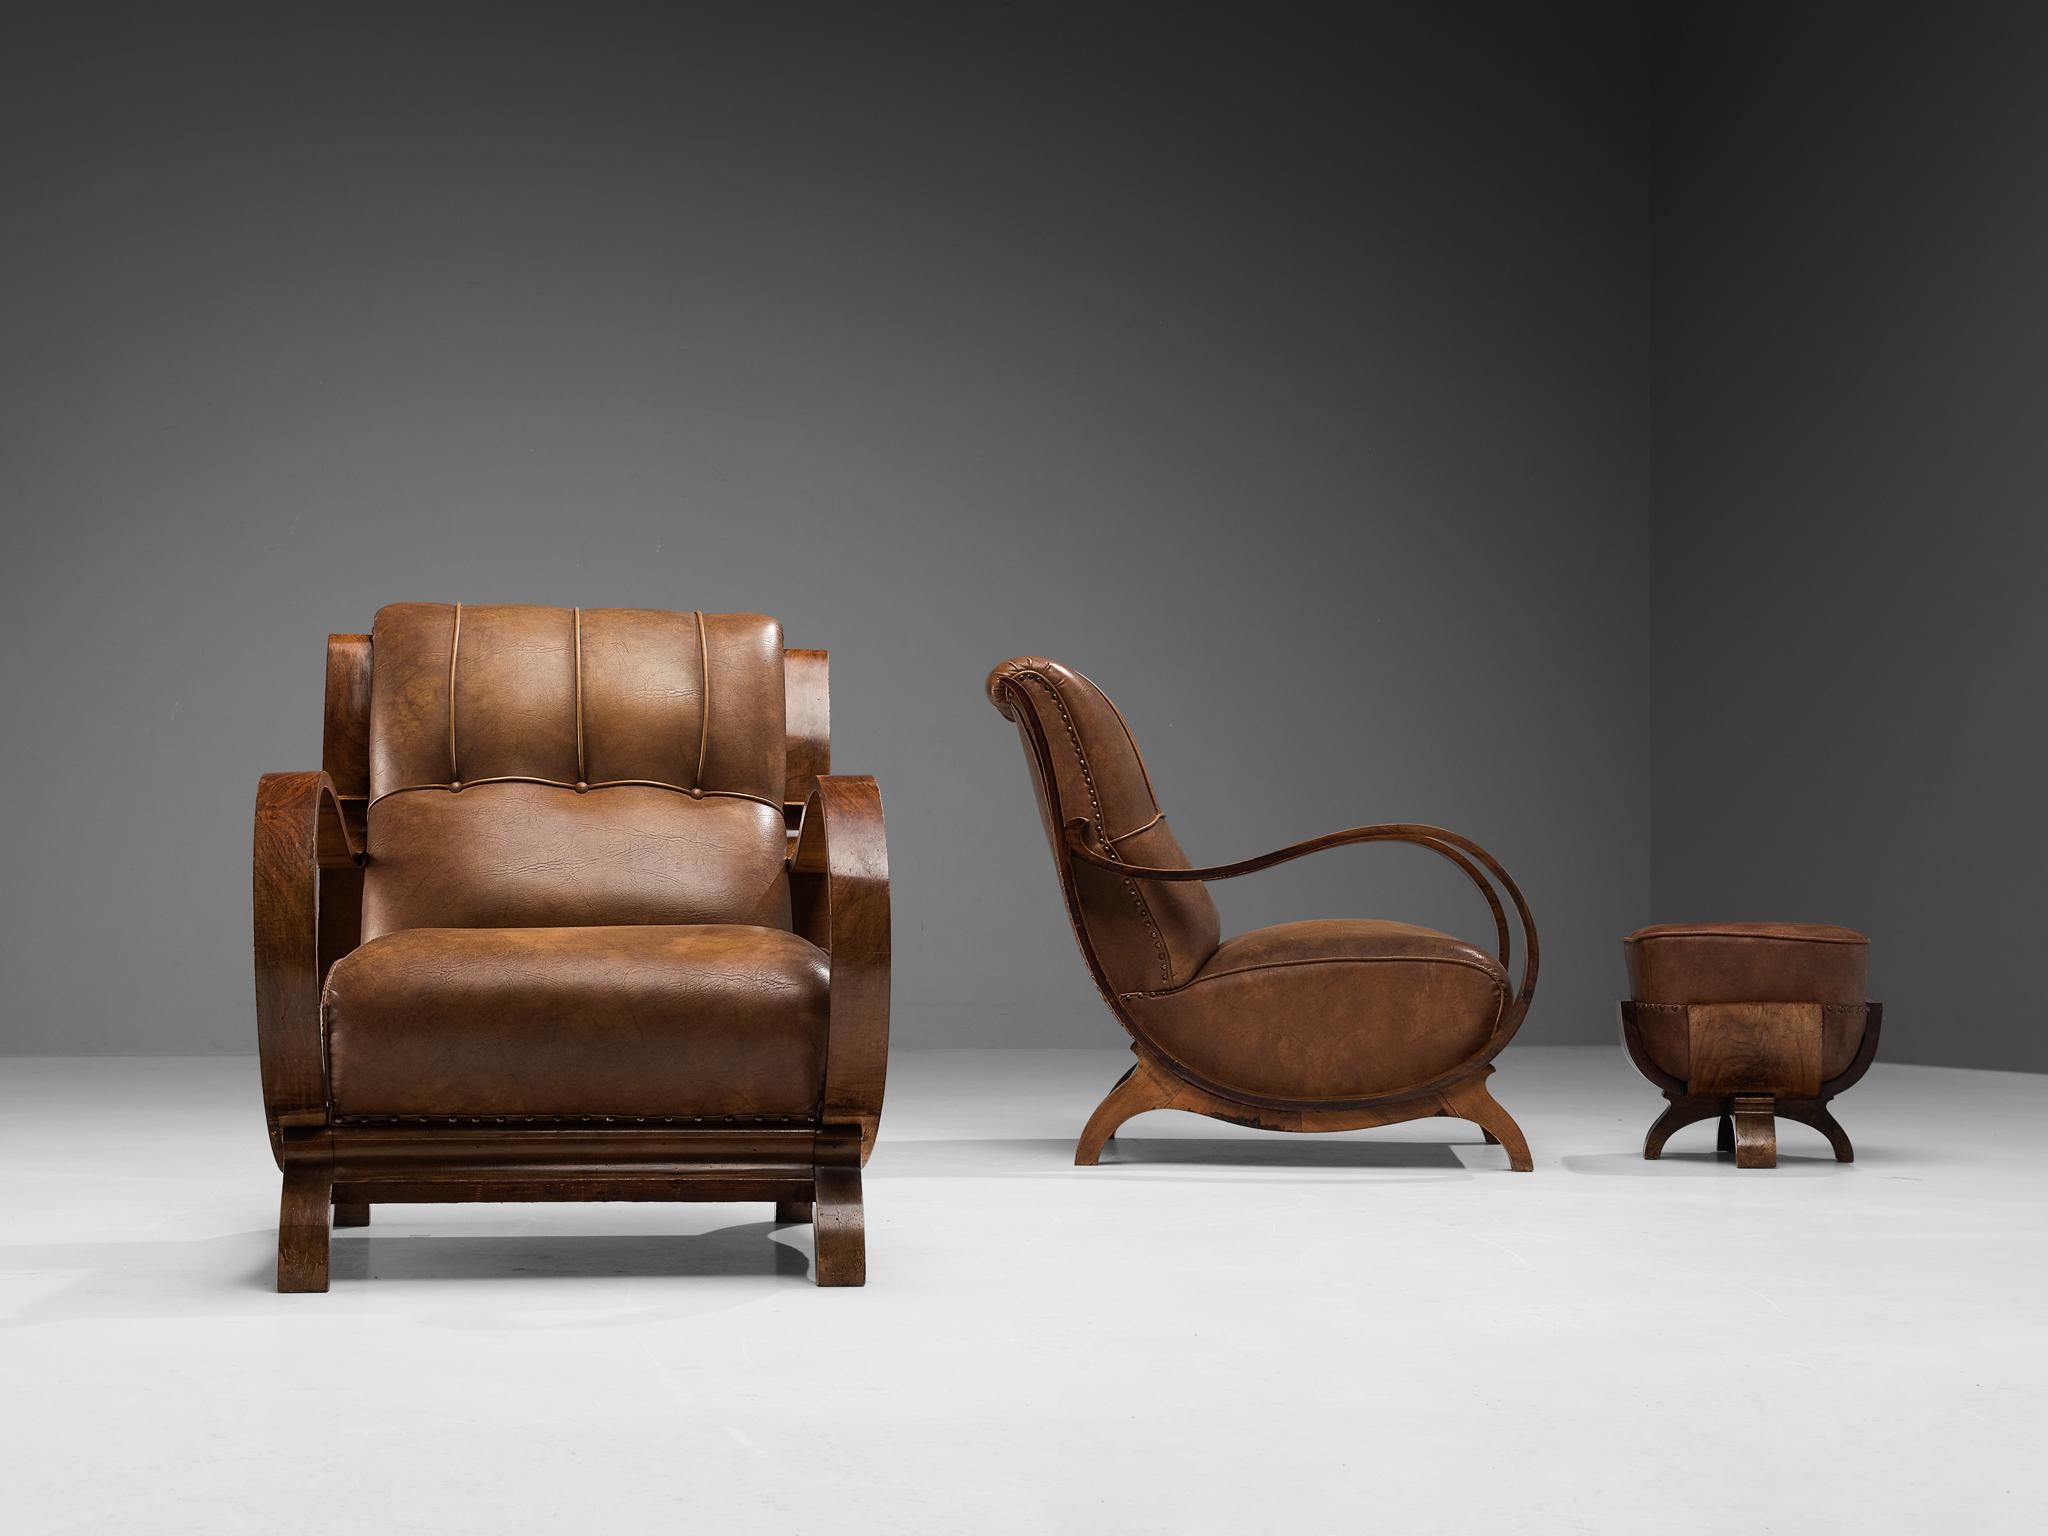 Italian Art Deco Lounge Chairs with Ottoman in Walnut and Leather 3